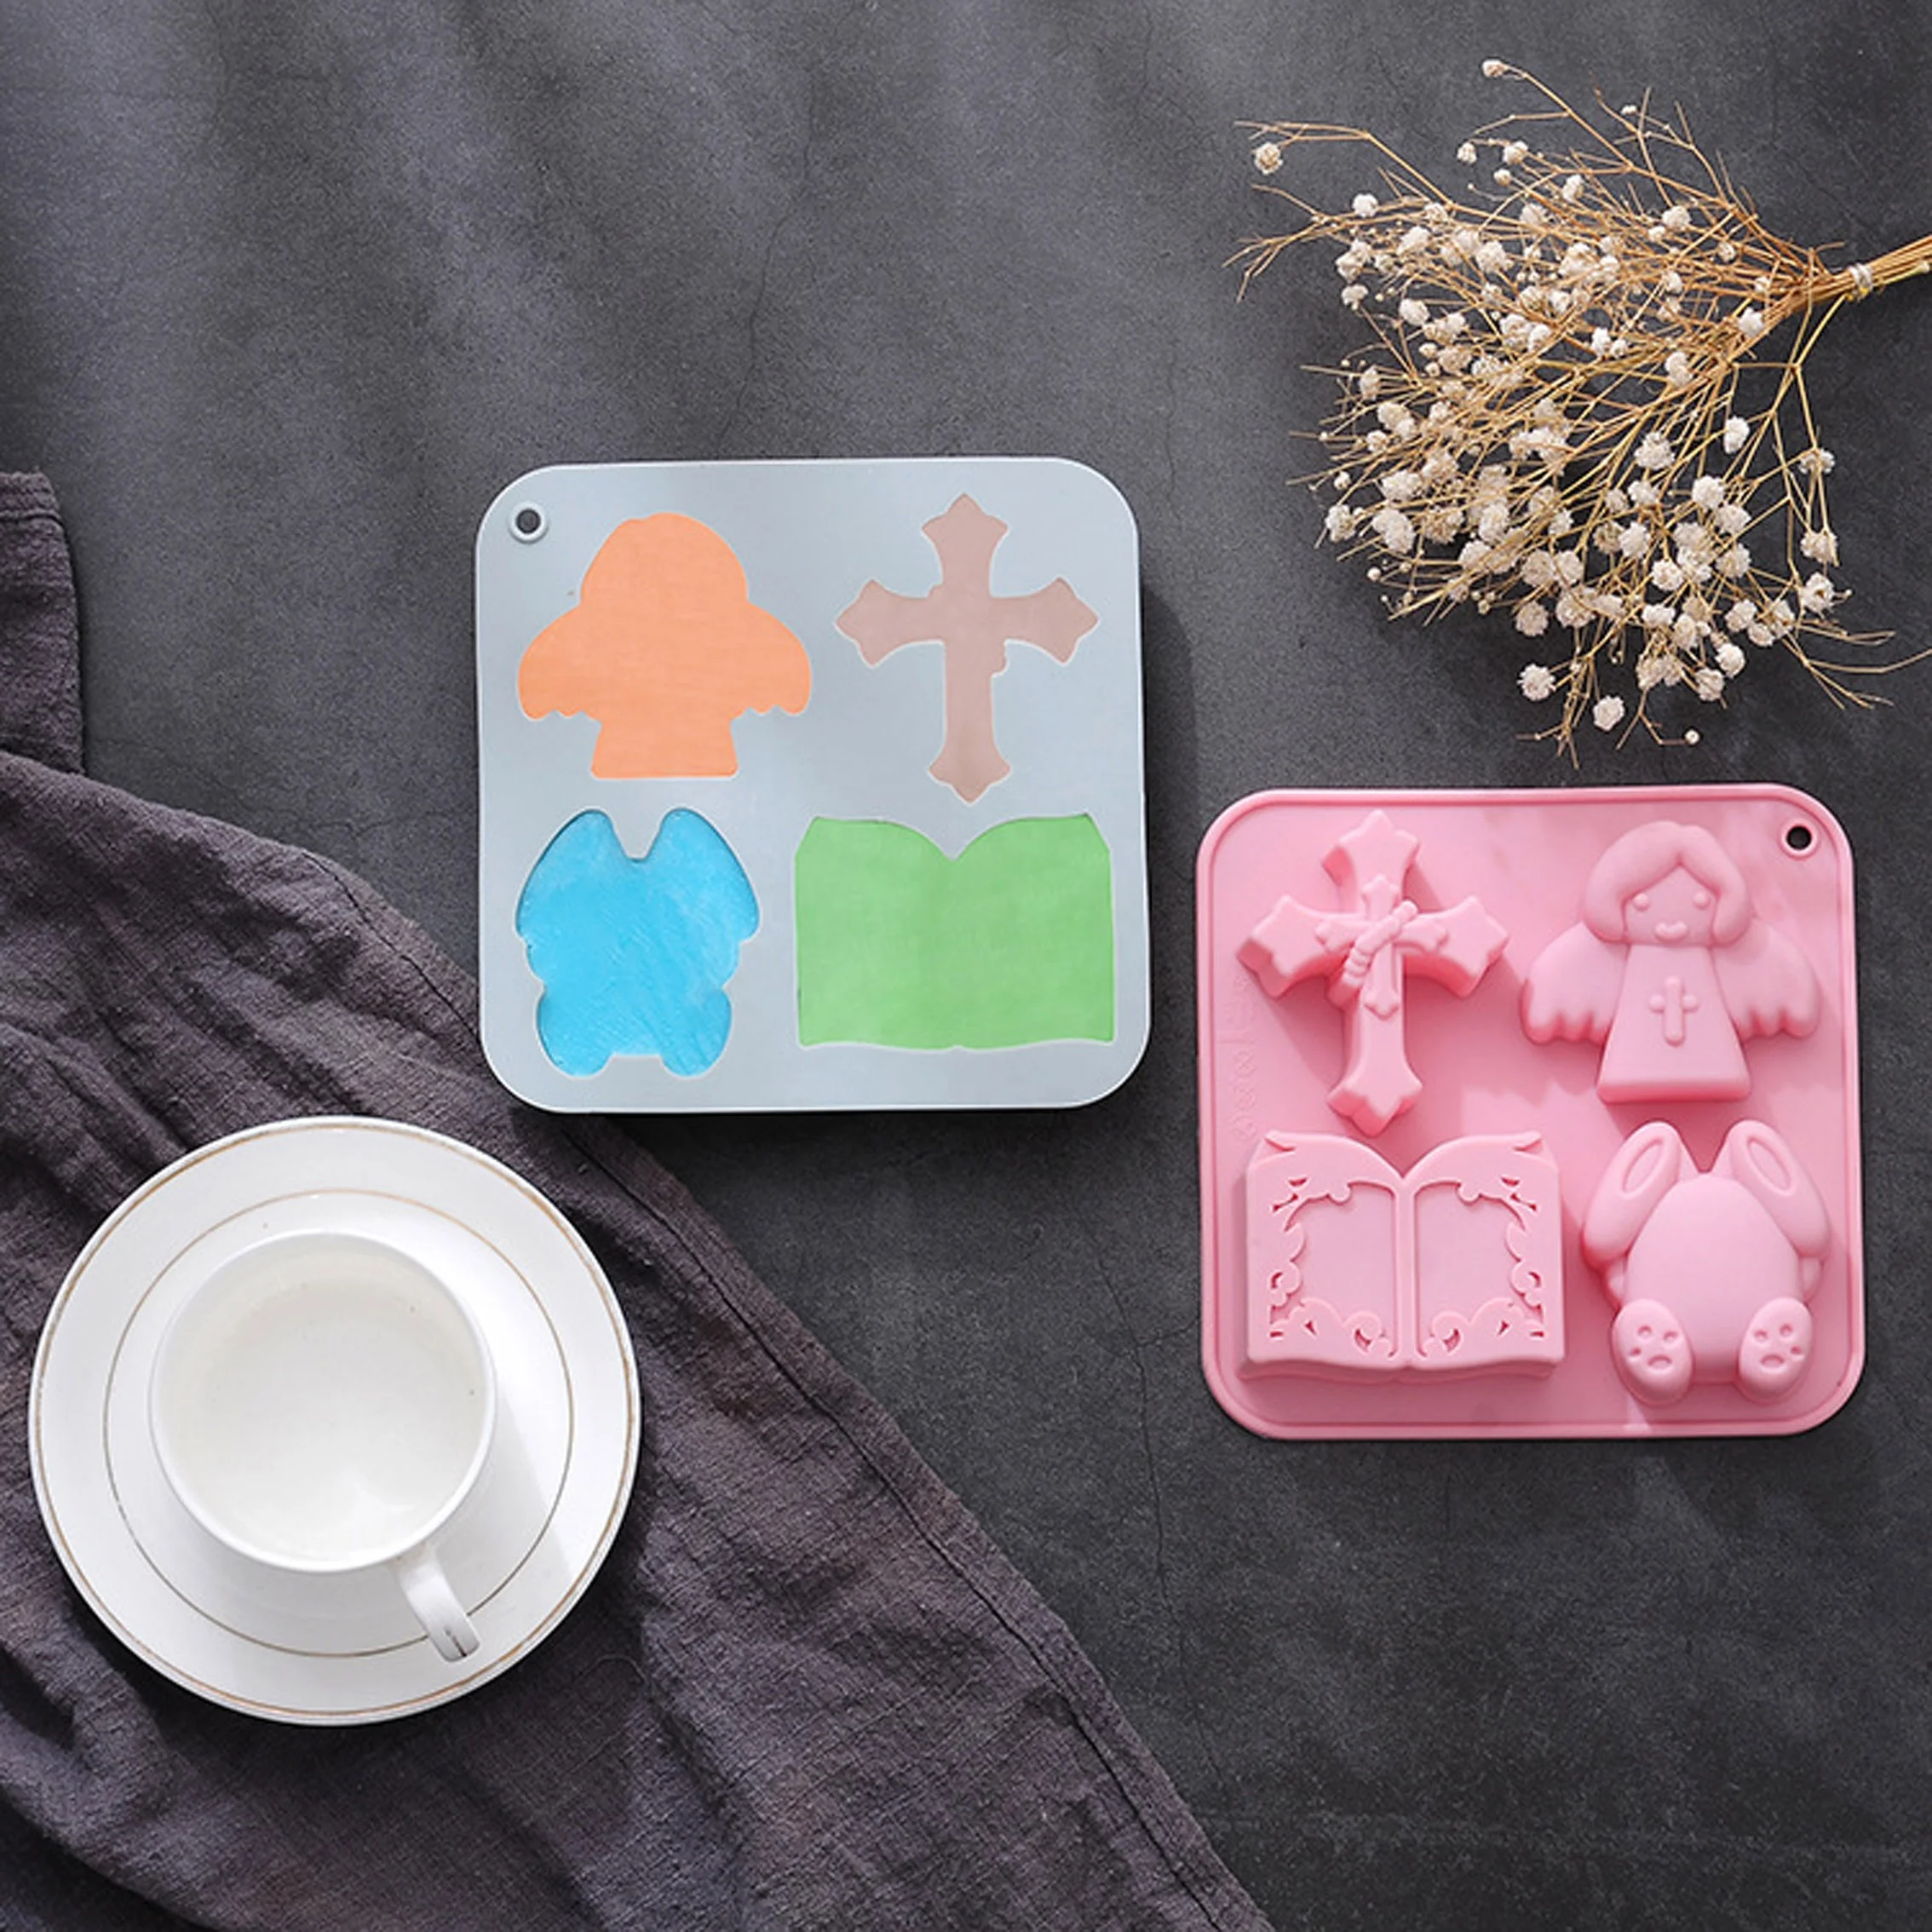 4 Even Easter Cross Angel Bible Shaped Silicone Cake Mold Soap Mold Easter Decoration Tools